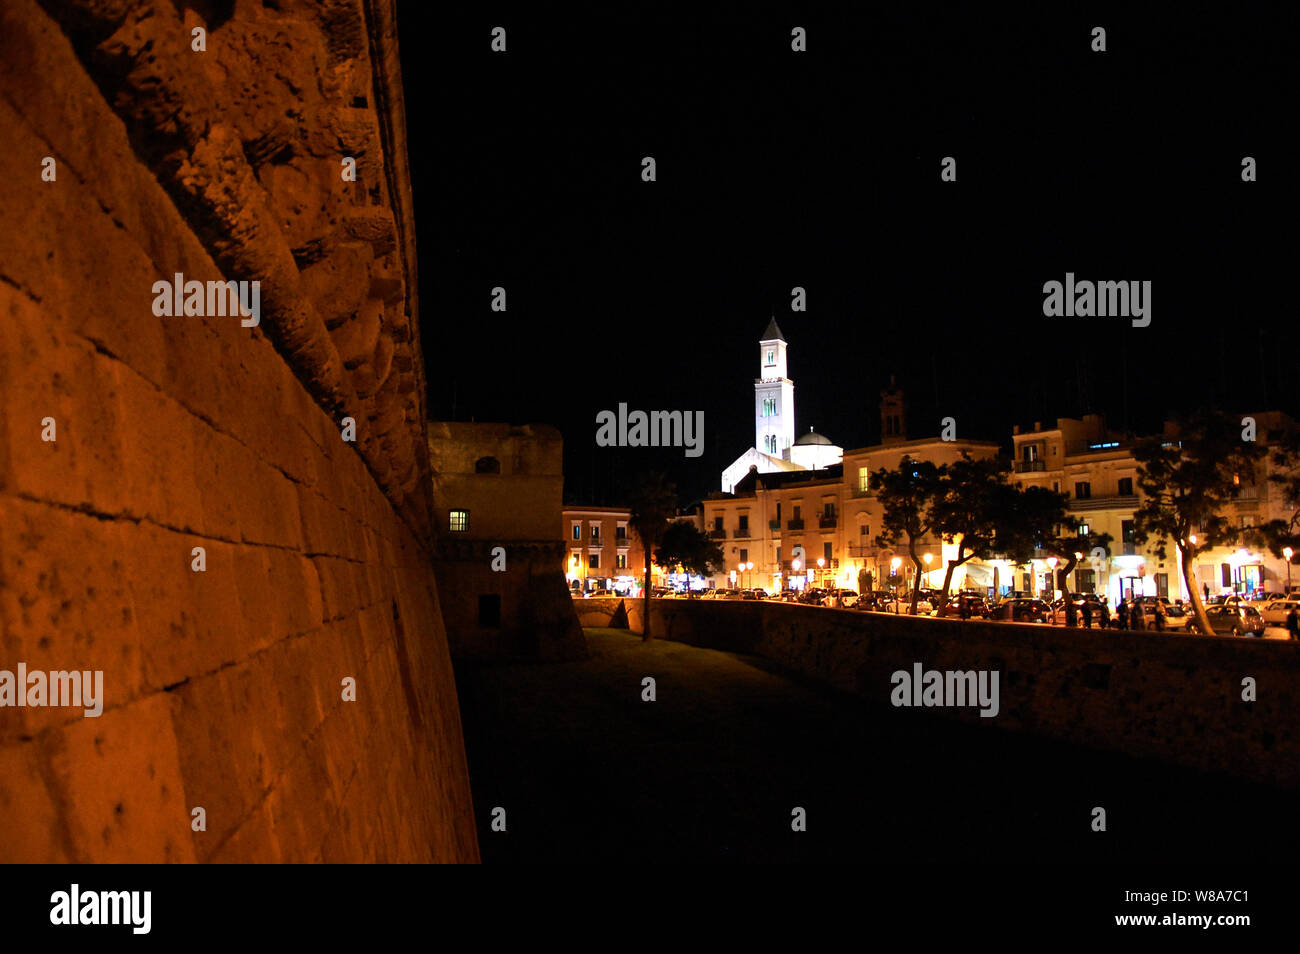 Tower of the provincial administration building seen at night from the medieval castle Castello Svevo. Bari, Apulia, Southern Italy Stock Photo